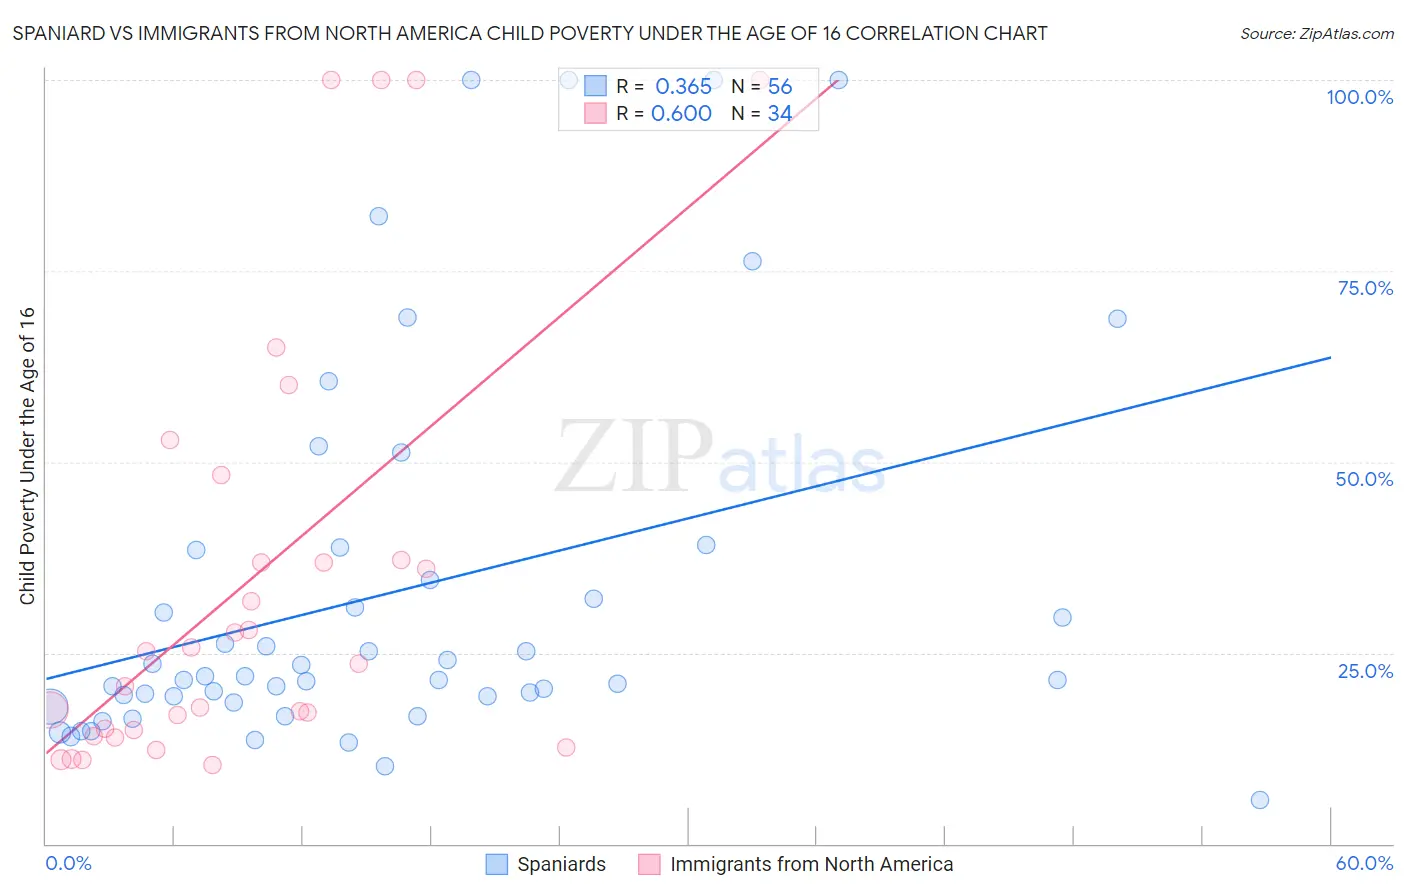 Spaniard vs Immigrants from North America Child Poverty Under the Age of 16